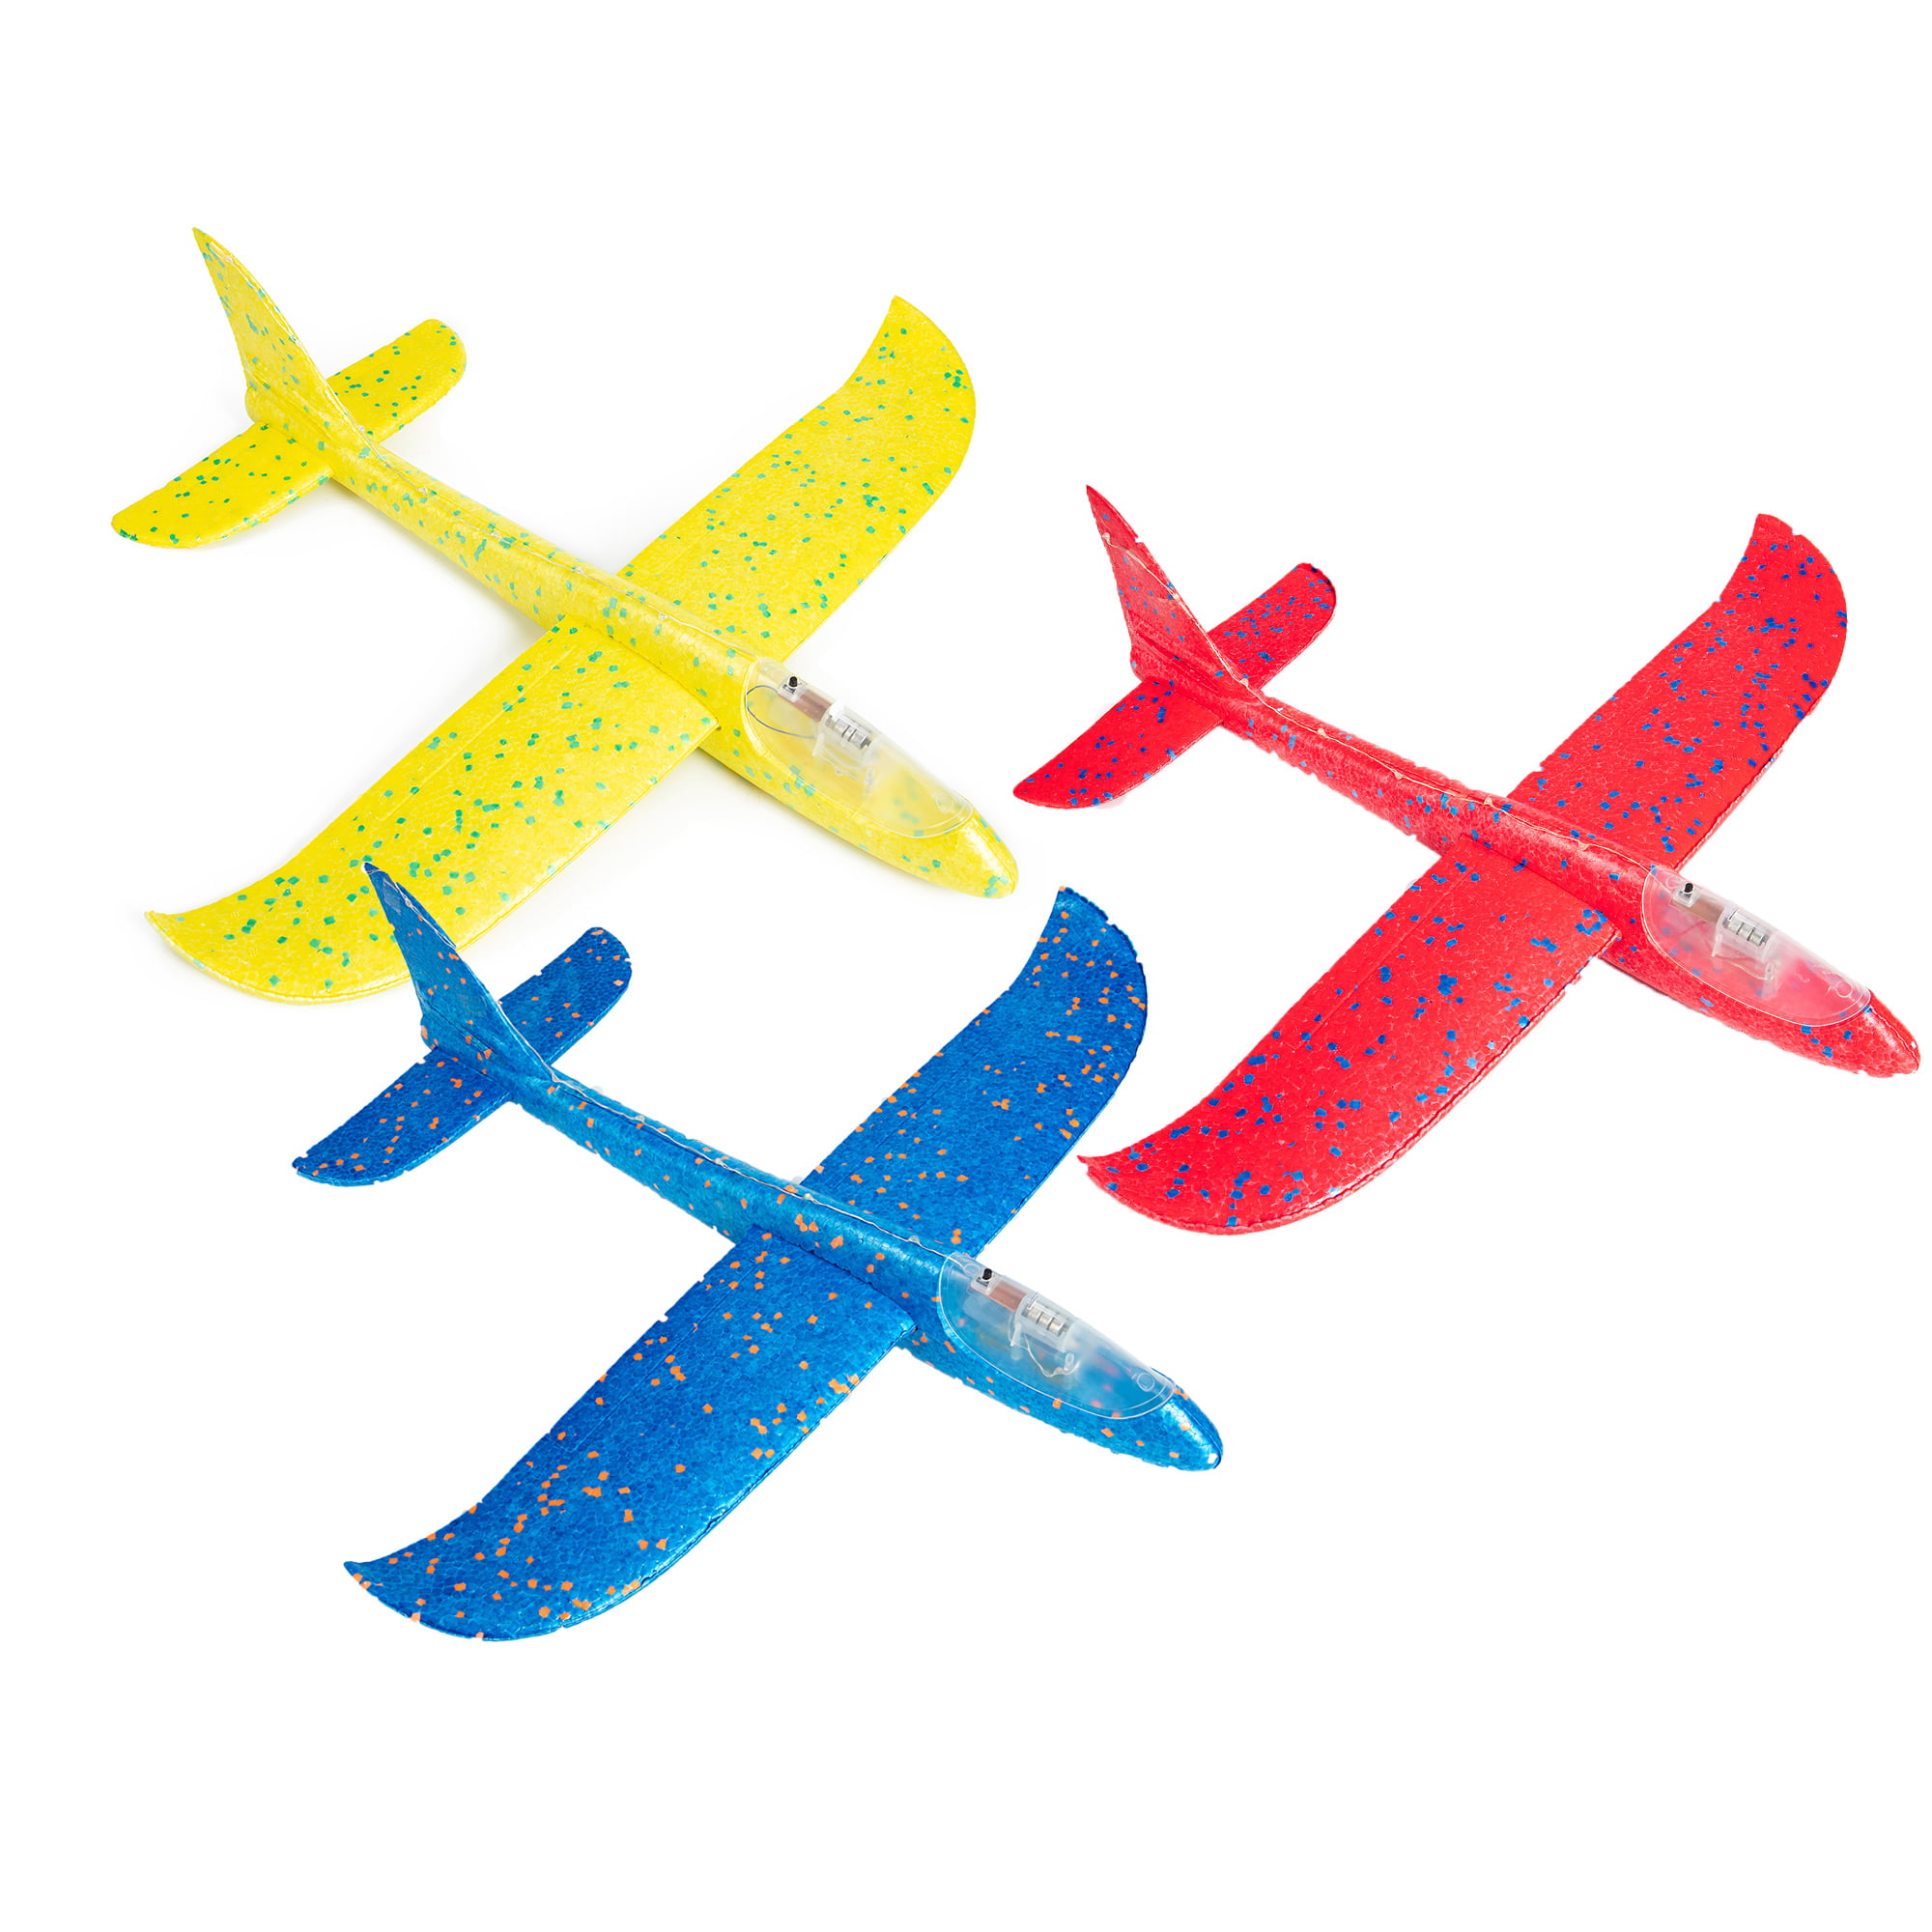 Bubble Glider Plane Manual Throwing Inertial Plane Model for Outdoor Sports Toy ＆ Kids Toys Gift Foam Aircraft Model Soft Foam Airplane